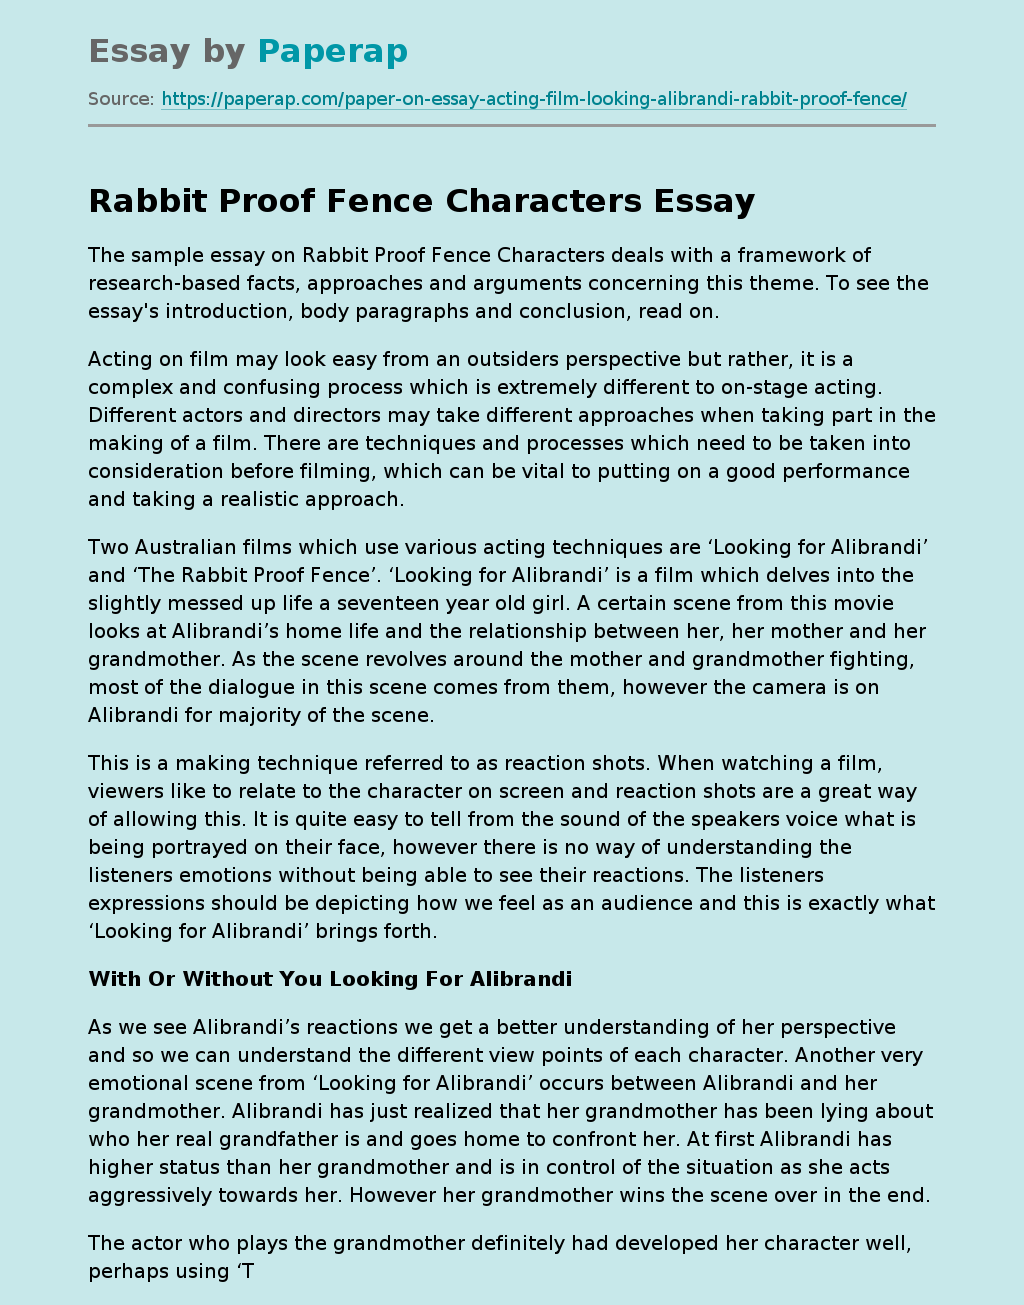 Rabbit Proof Fence Characters